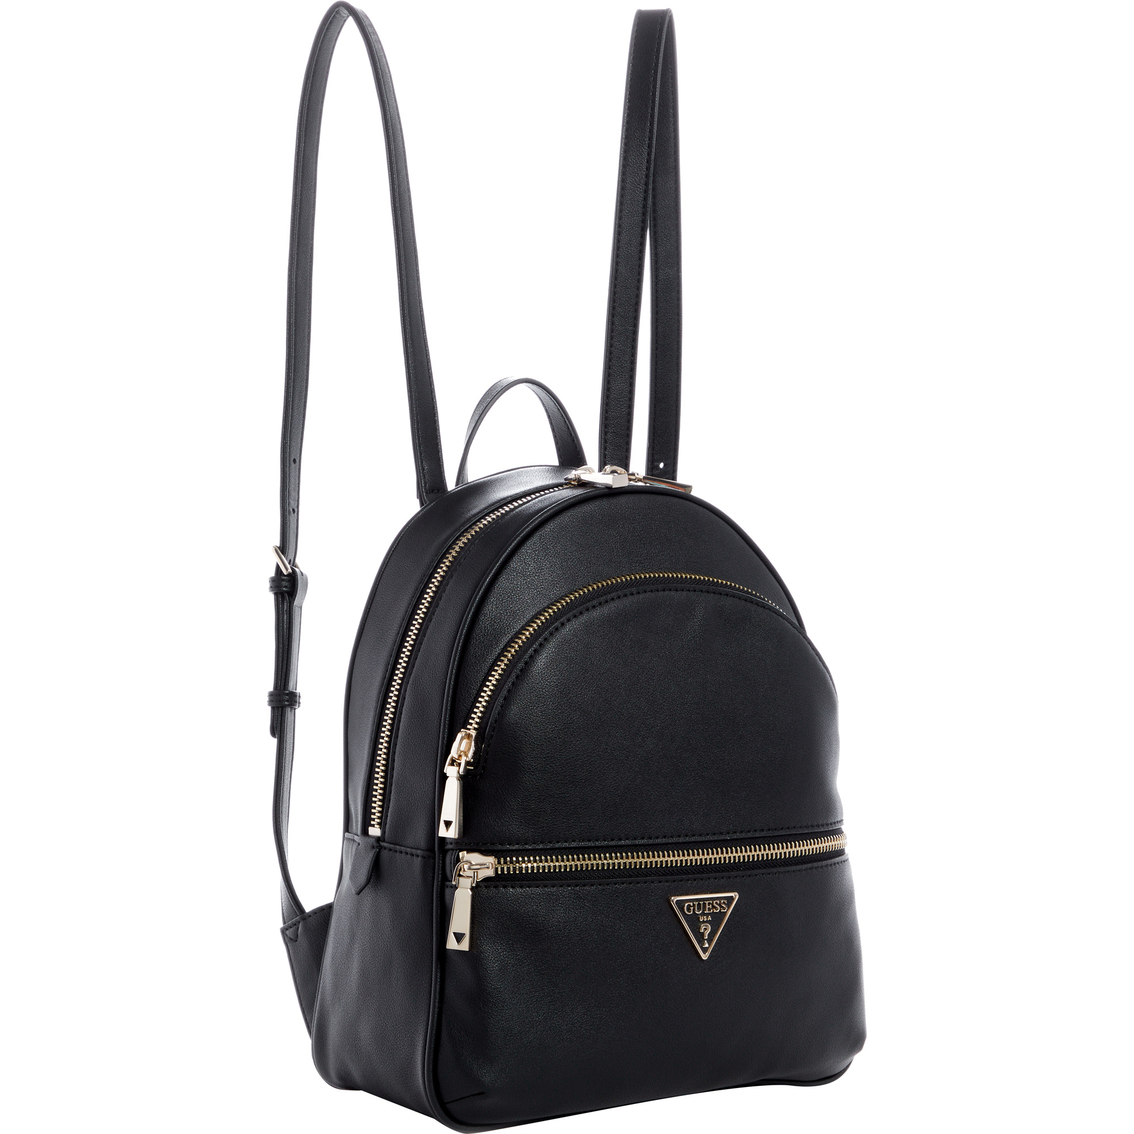 Guess Manhattan Backpack - Image 2 of 3